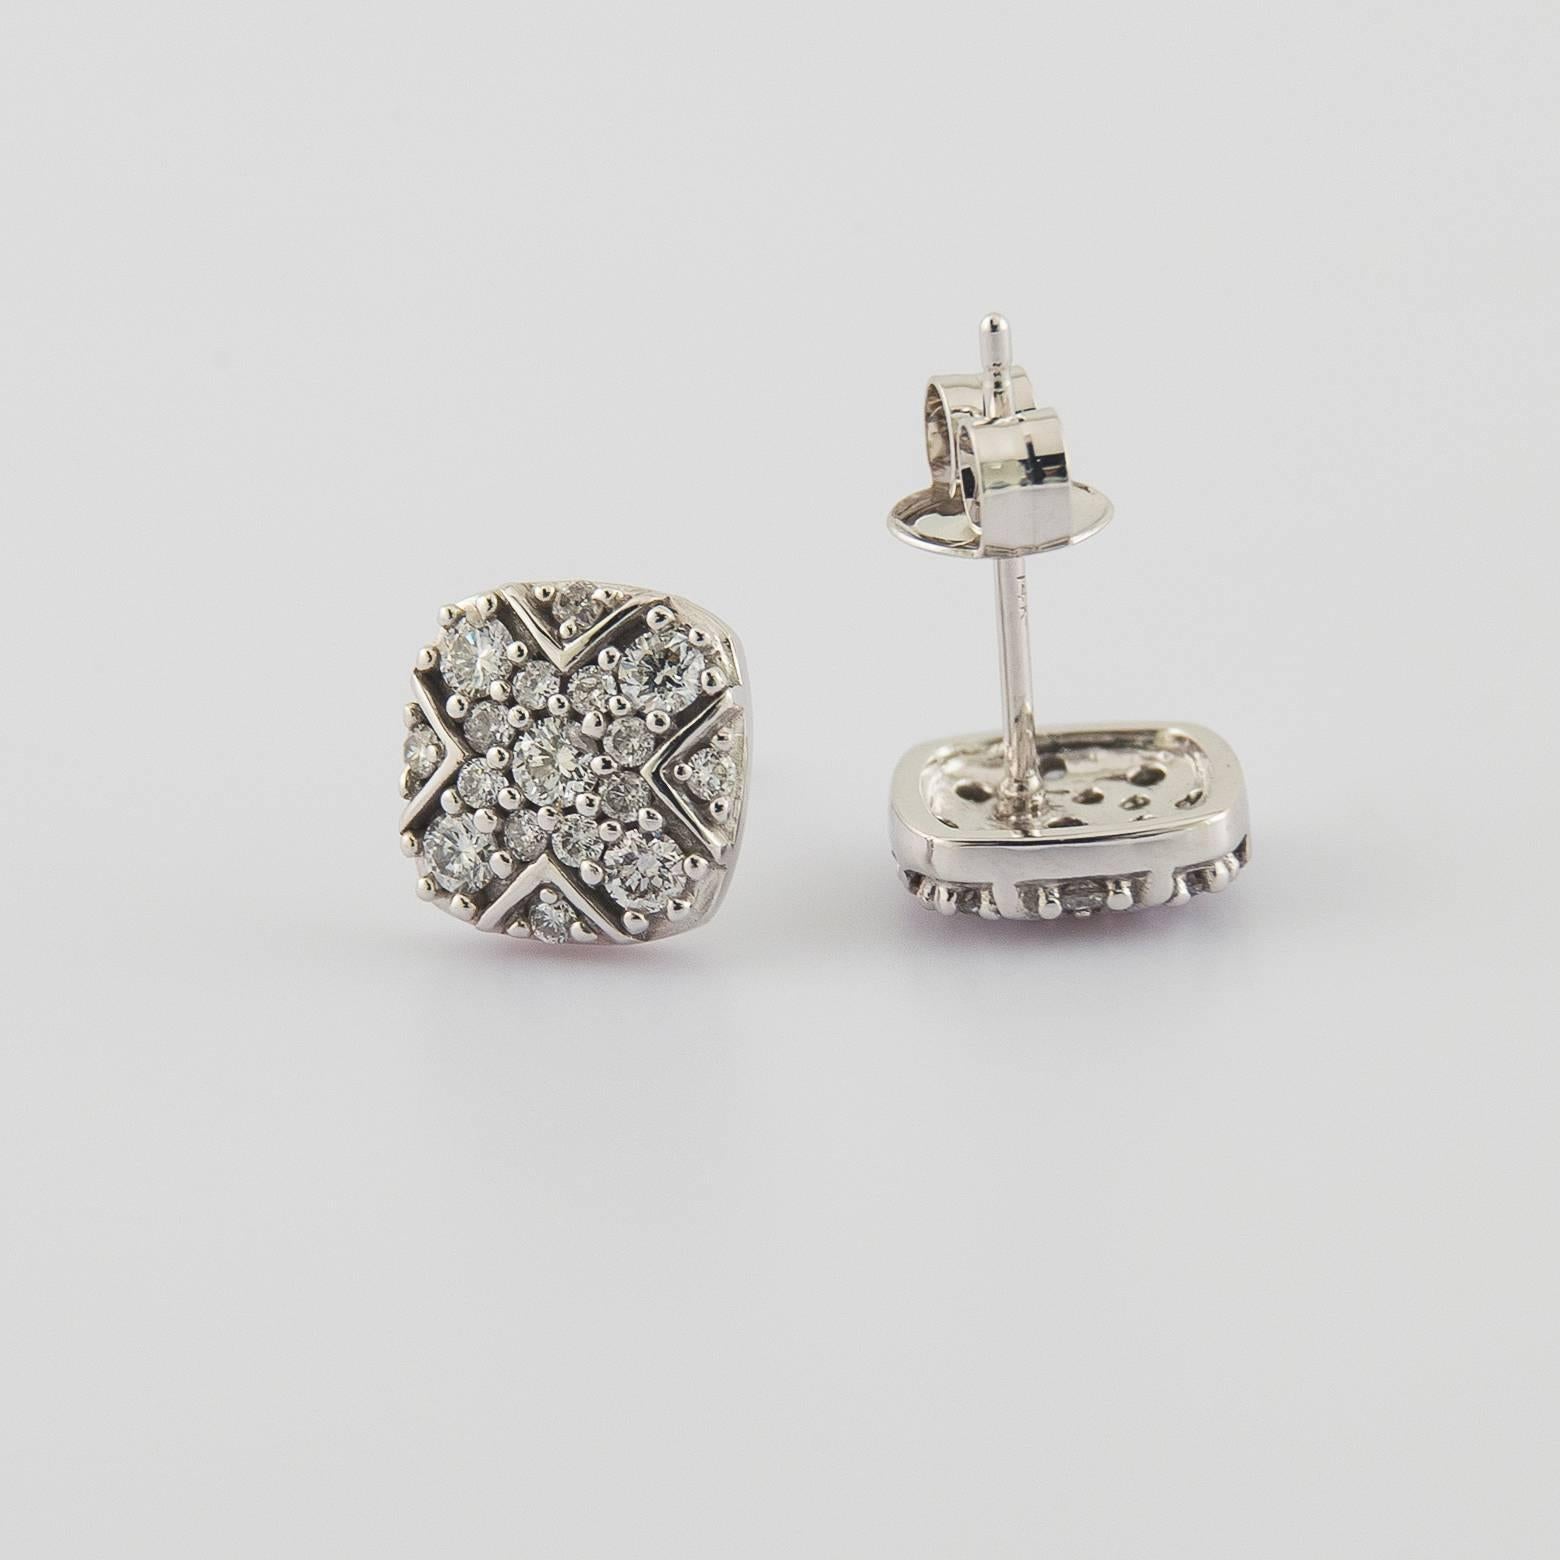 17 Diamonds on each stud earring. They look antique, intricate, and stunning. The detail work is incredible and each piece feels like a piece of history even though they are contemporary. The elegance has a professional aspect to them and they can